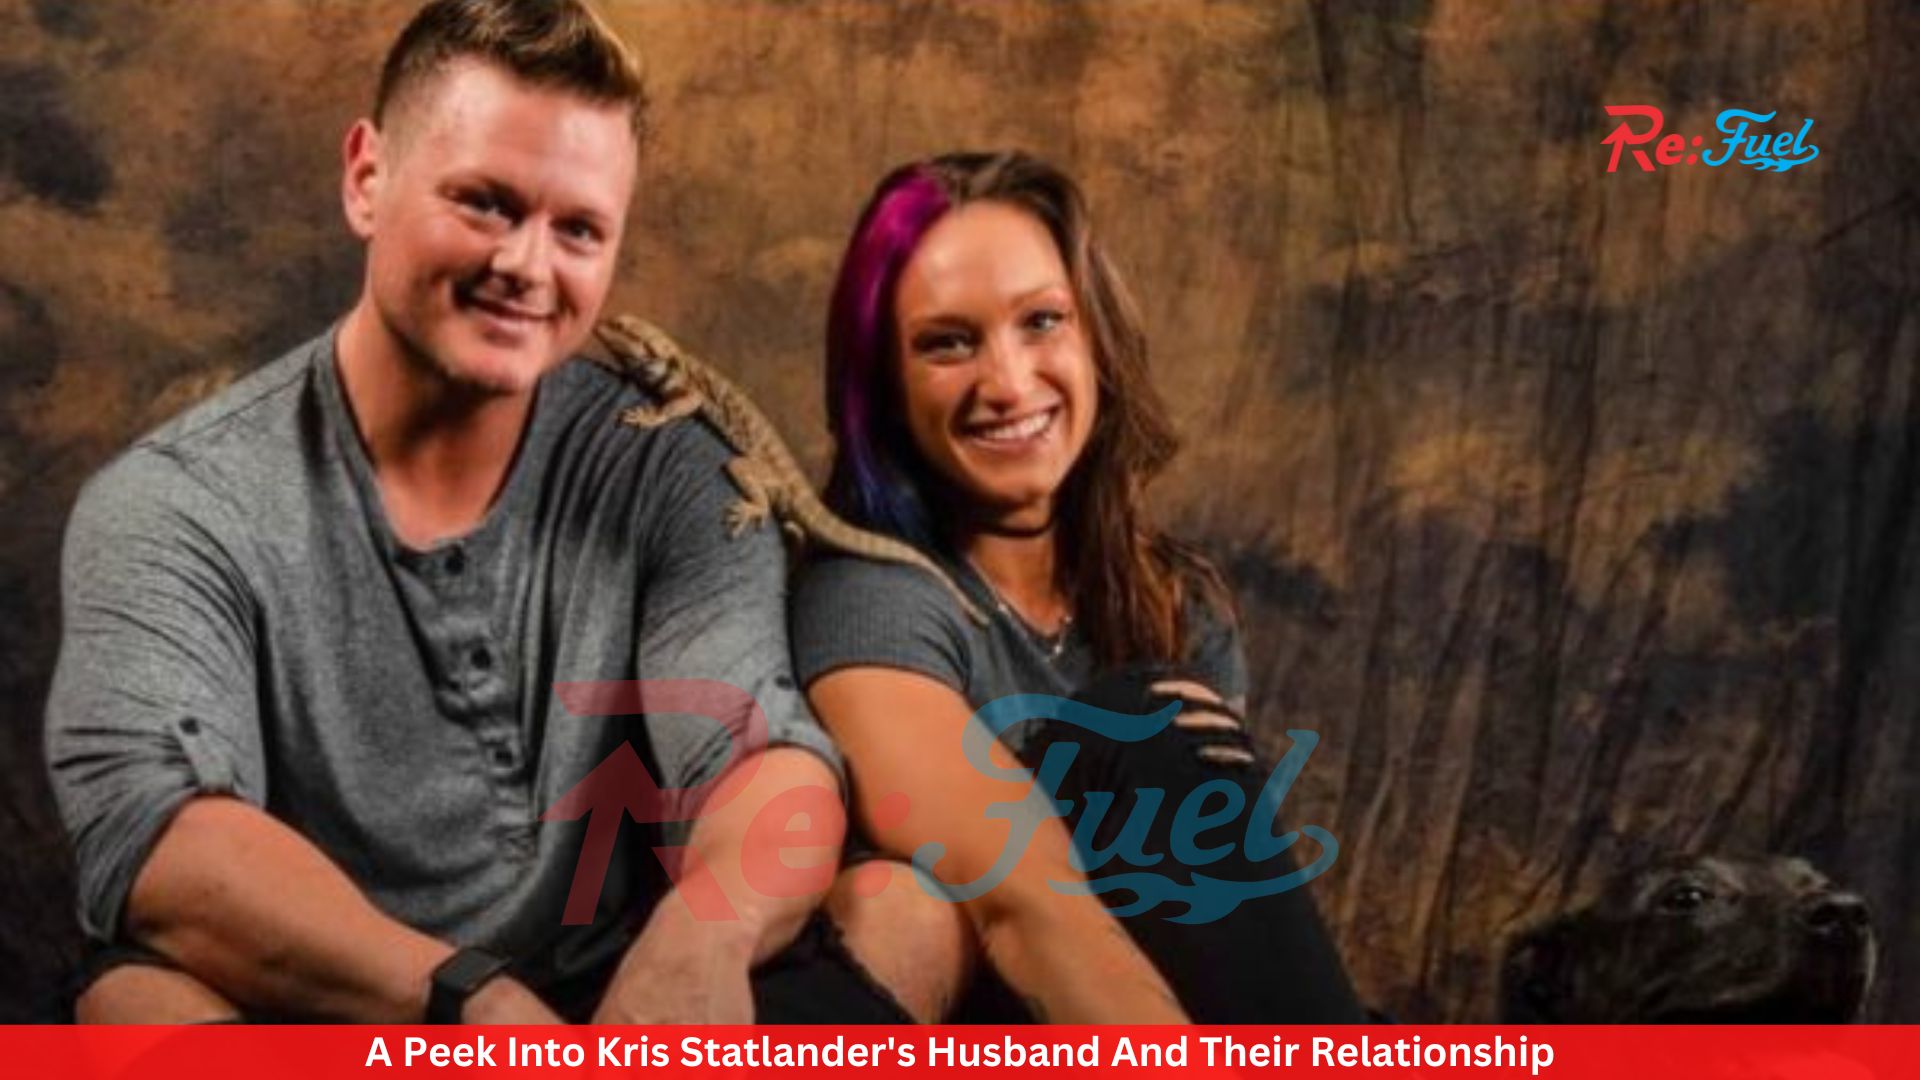 A Peek Into Kris Statlander's Husband And Their Relationship